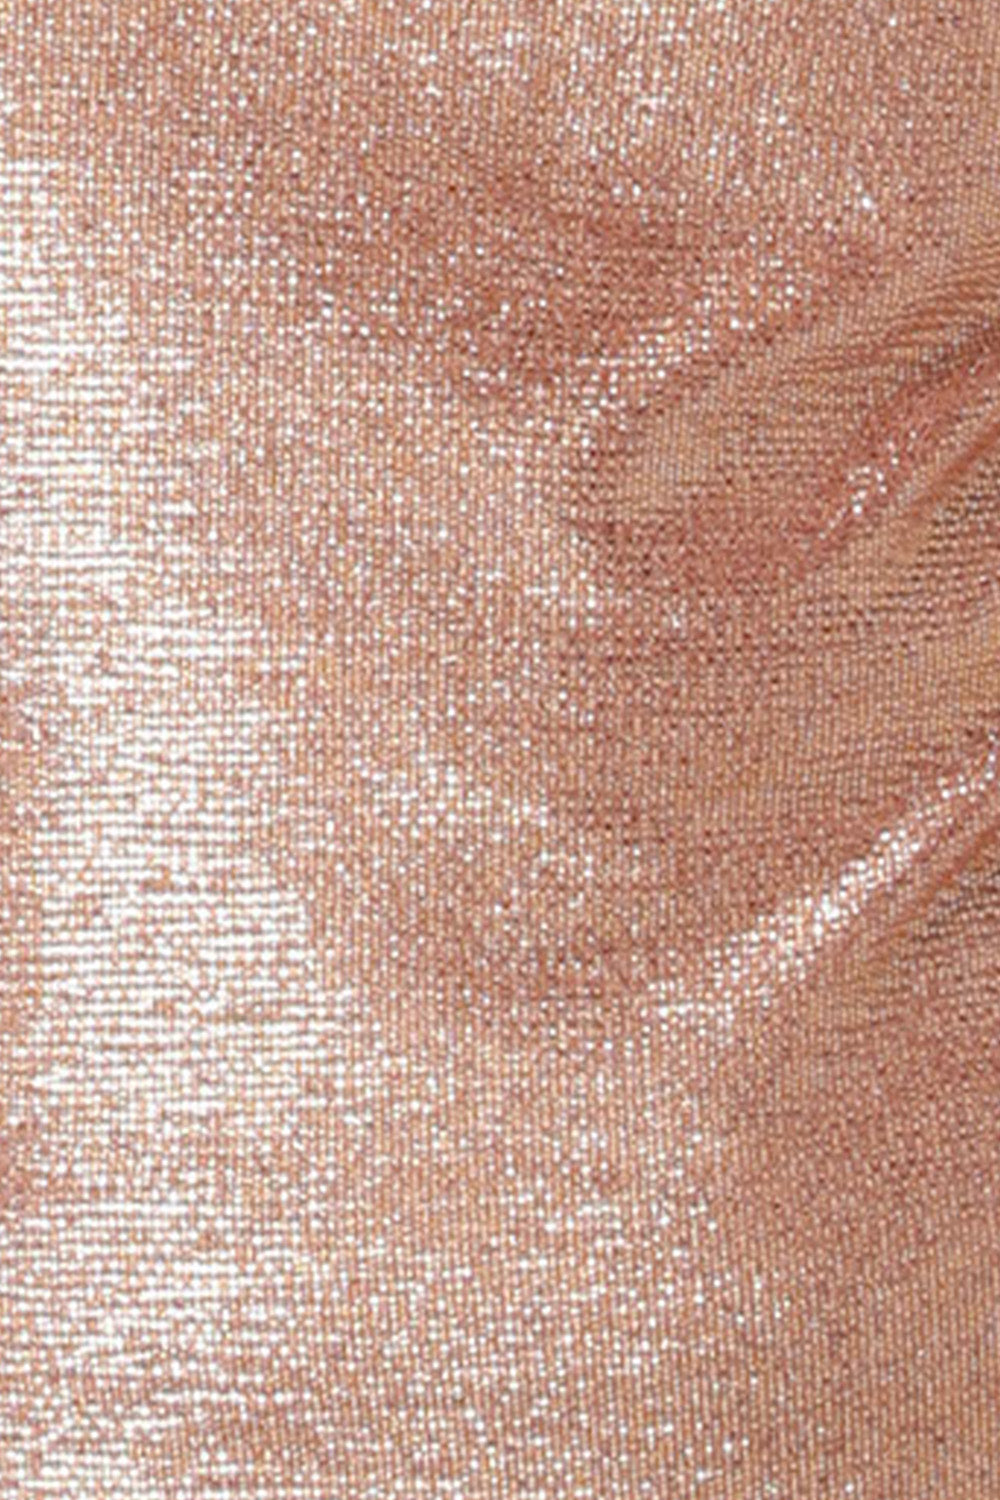 fabric swatch of Antique Xanadu, a shimmering jersey fabric in shades of pink champagne, this sparkly fabric is used to make Australian and New Zealand women's fashion label, L&Fs new range of occasionwear and cocktail party tops and skirts.